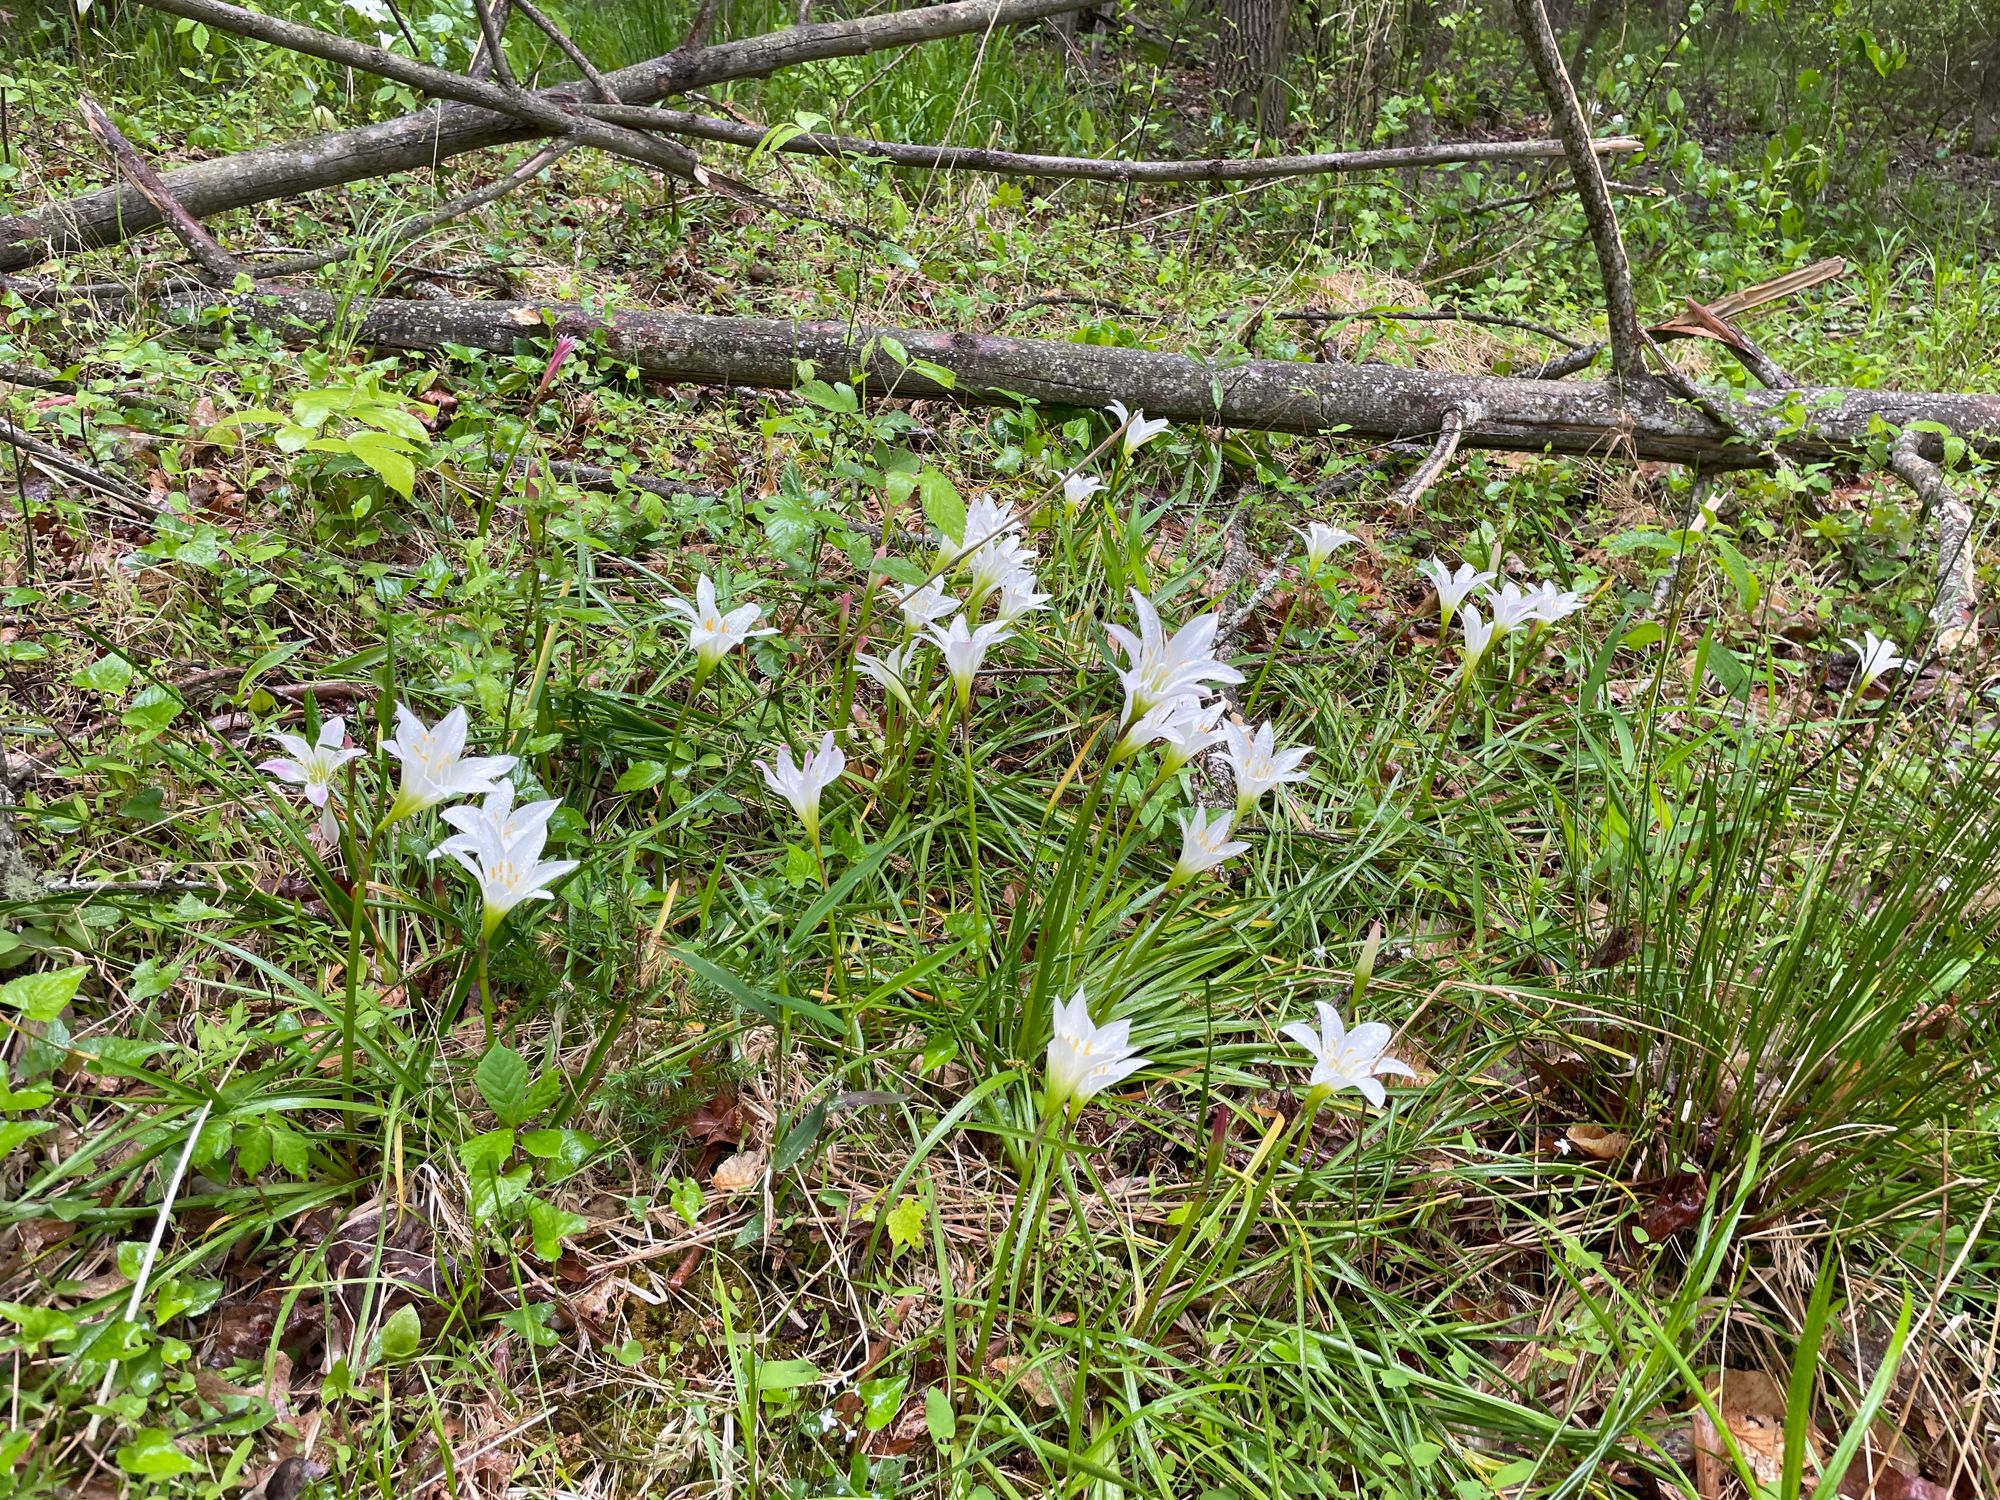 White flowers against a background of green grass and a small downed tree.